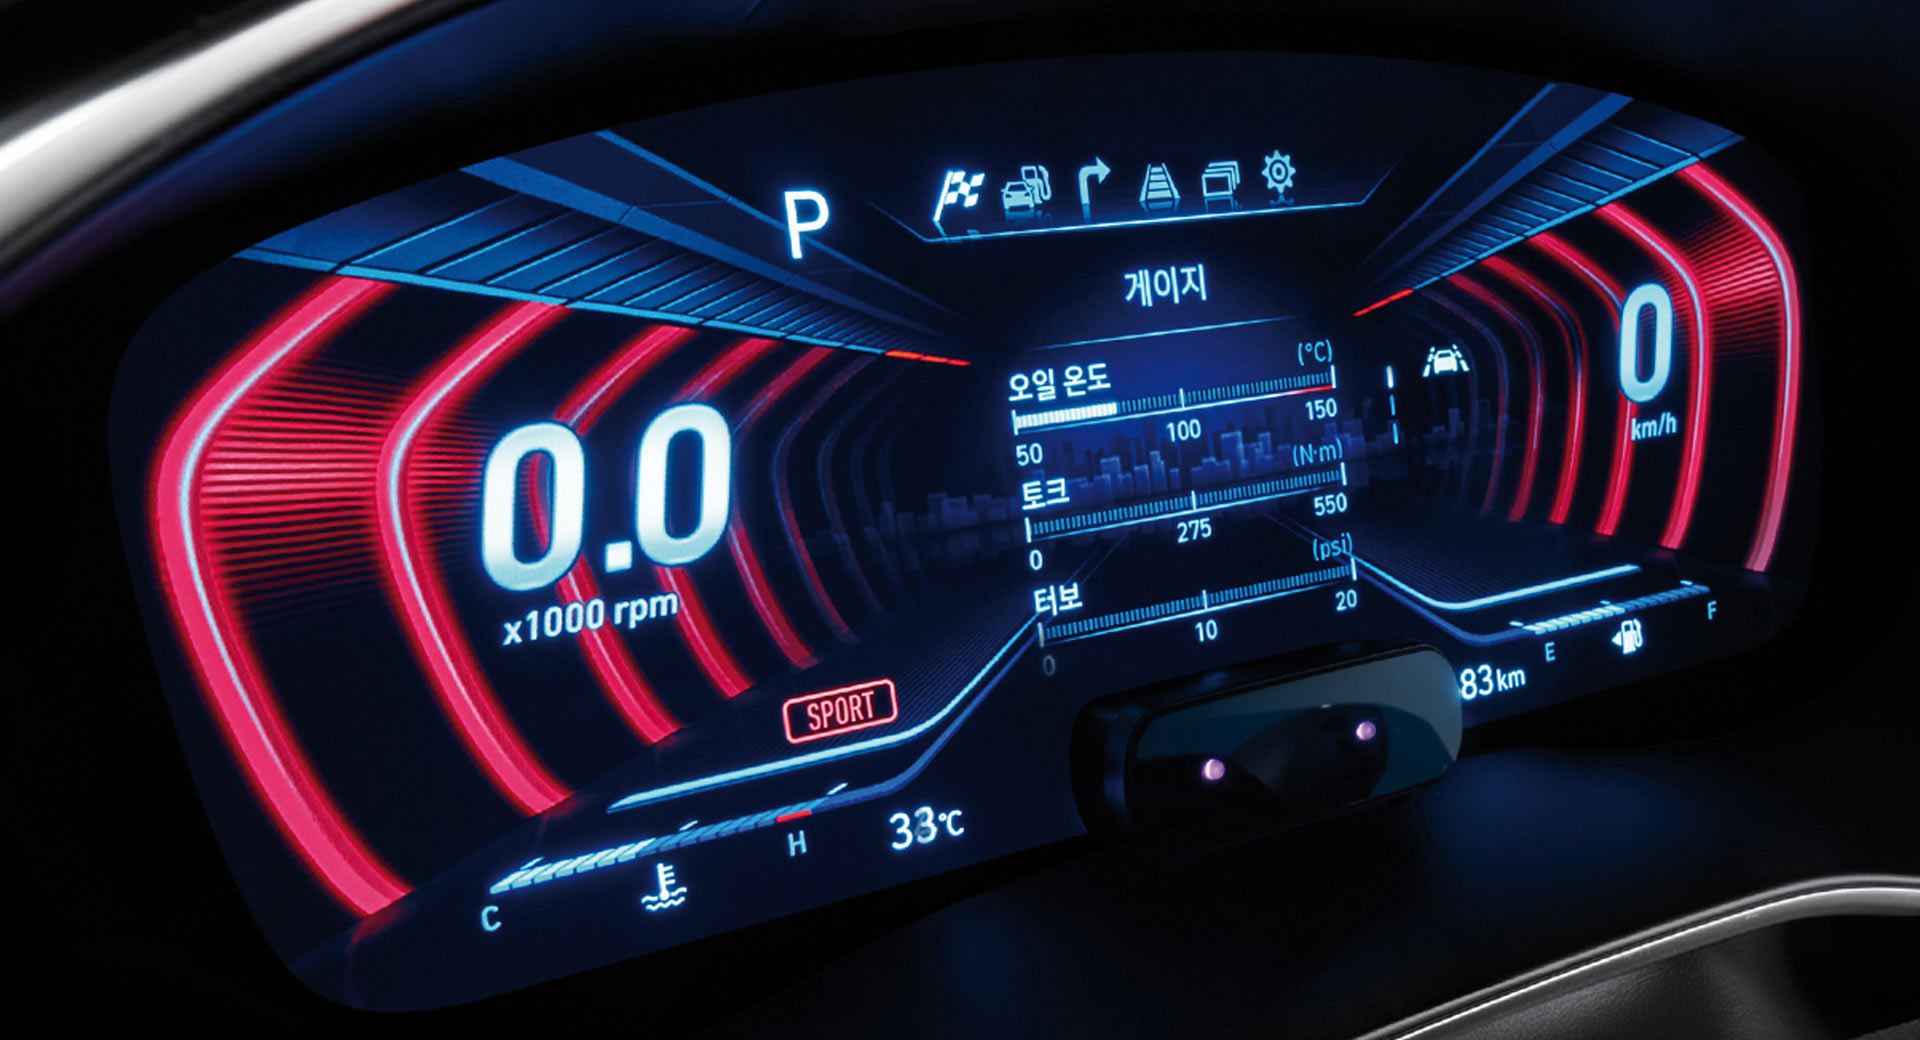 Genesis G70 Offers A New 3D Digital Instrument Cluster In South Korea